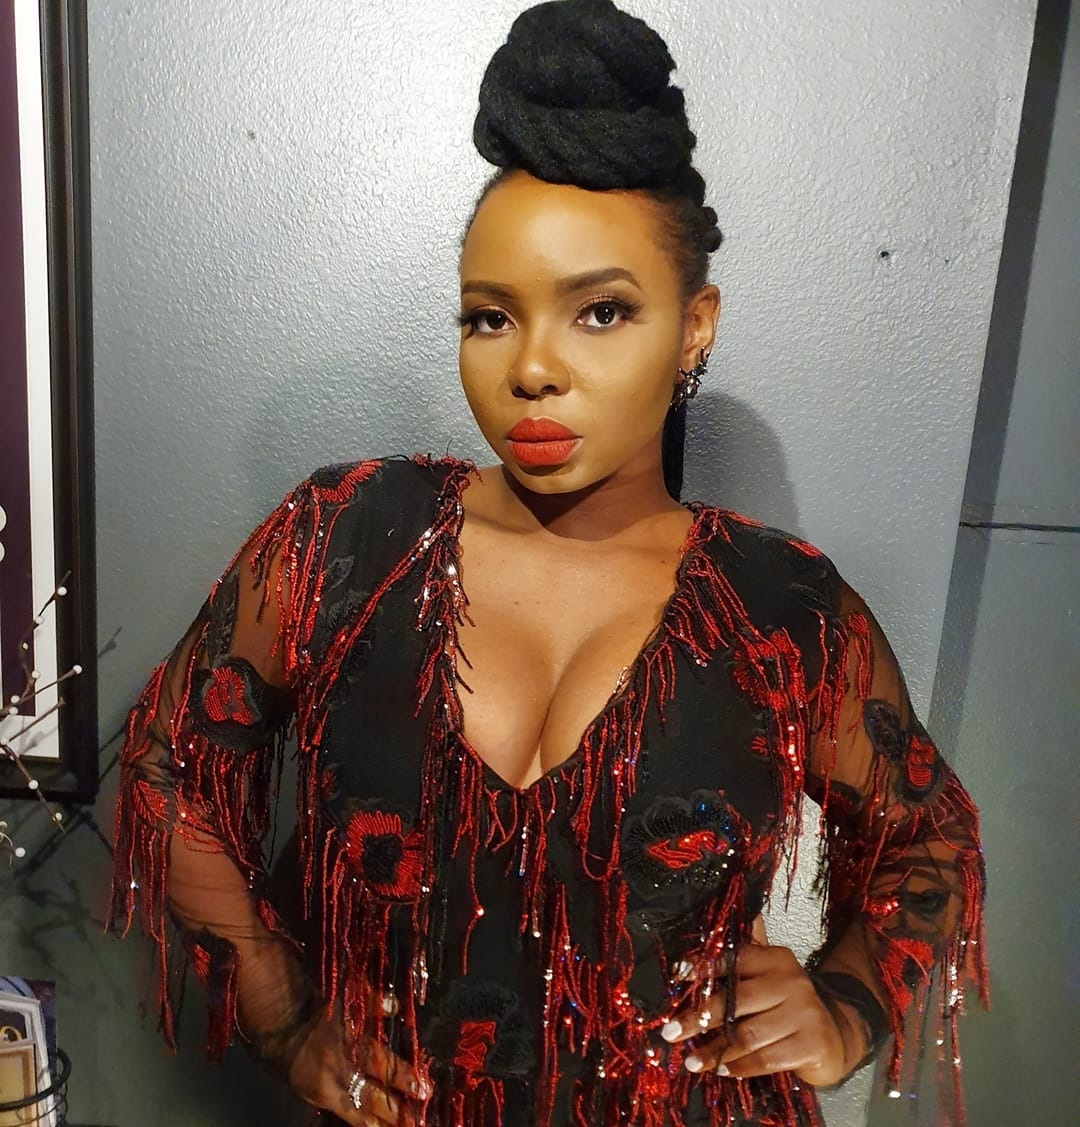 Dont cry No one Cares start smiling they all get jealous Yemi Alade